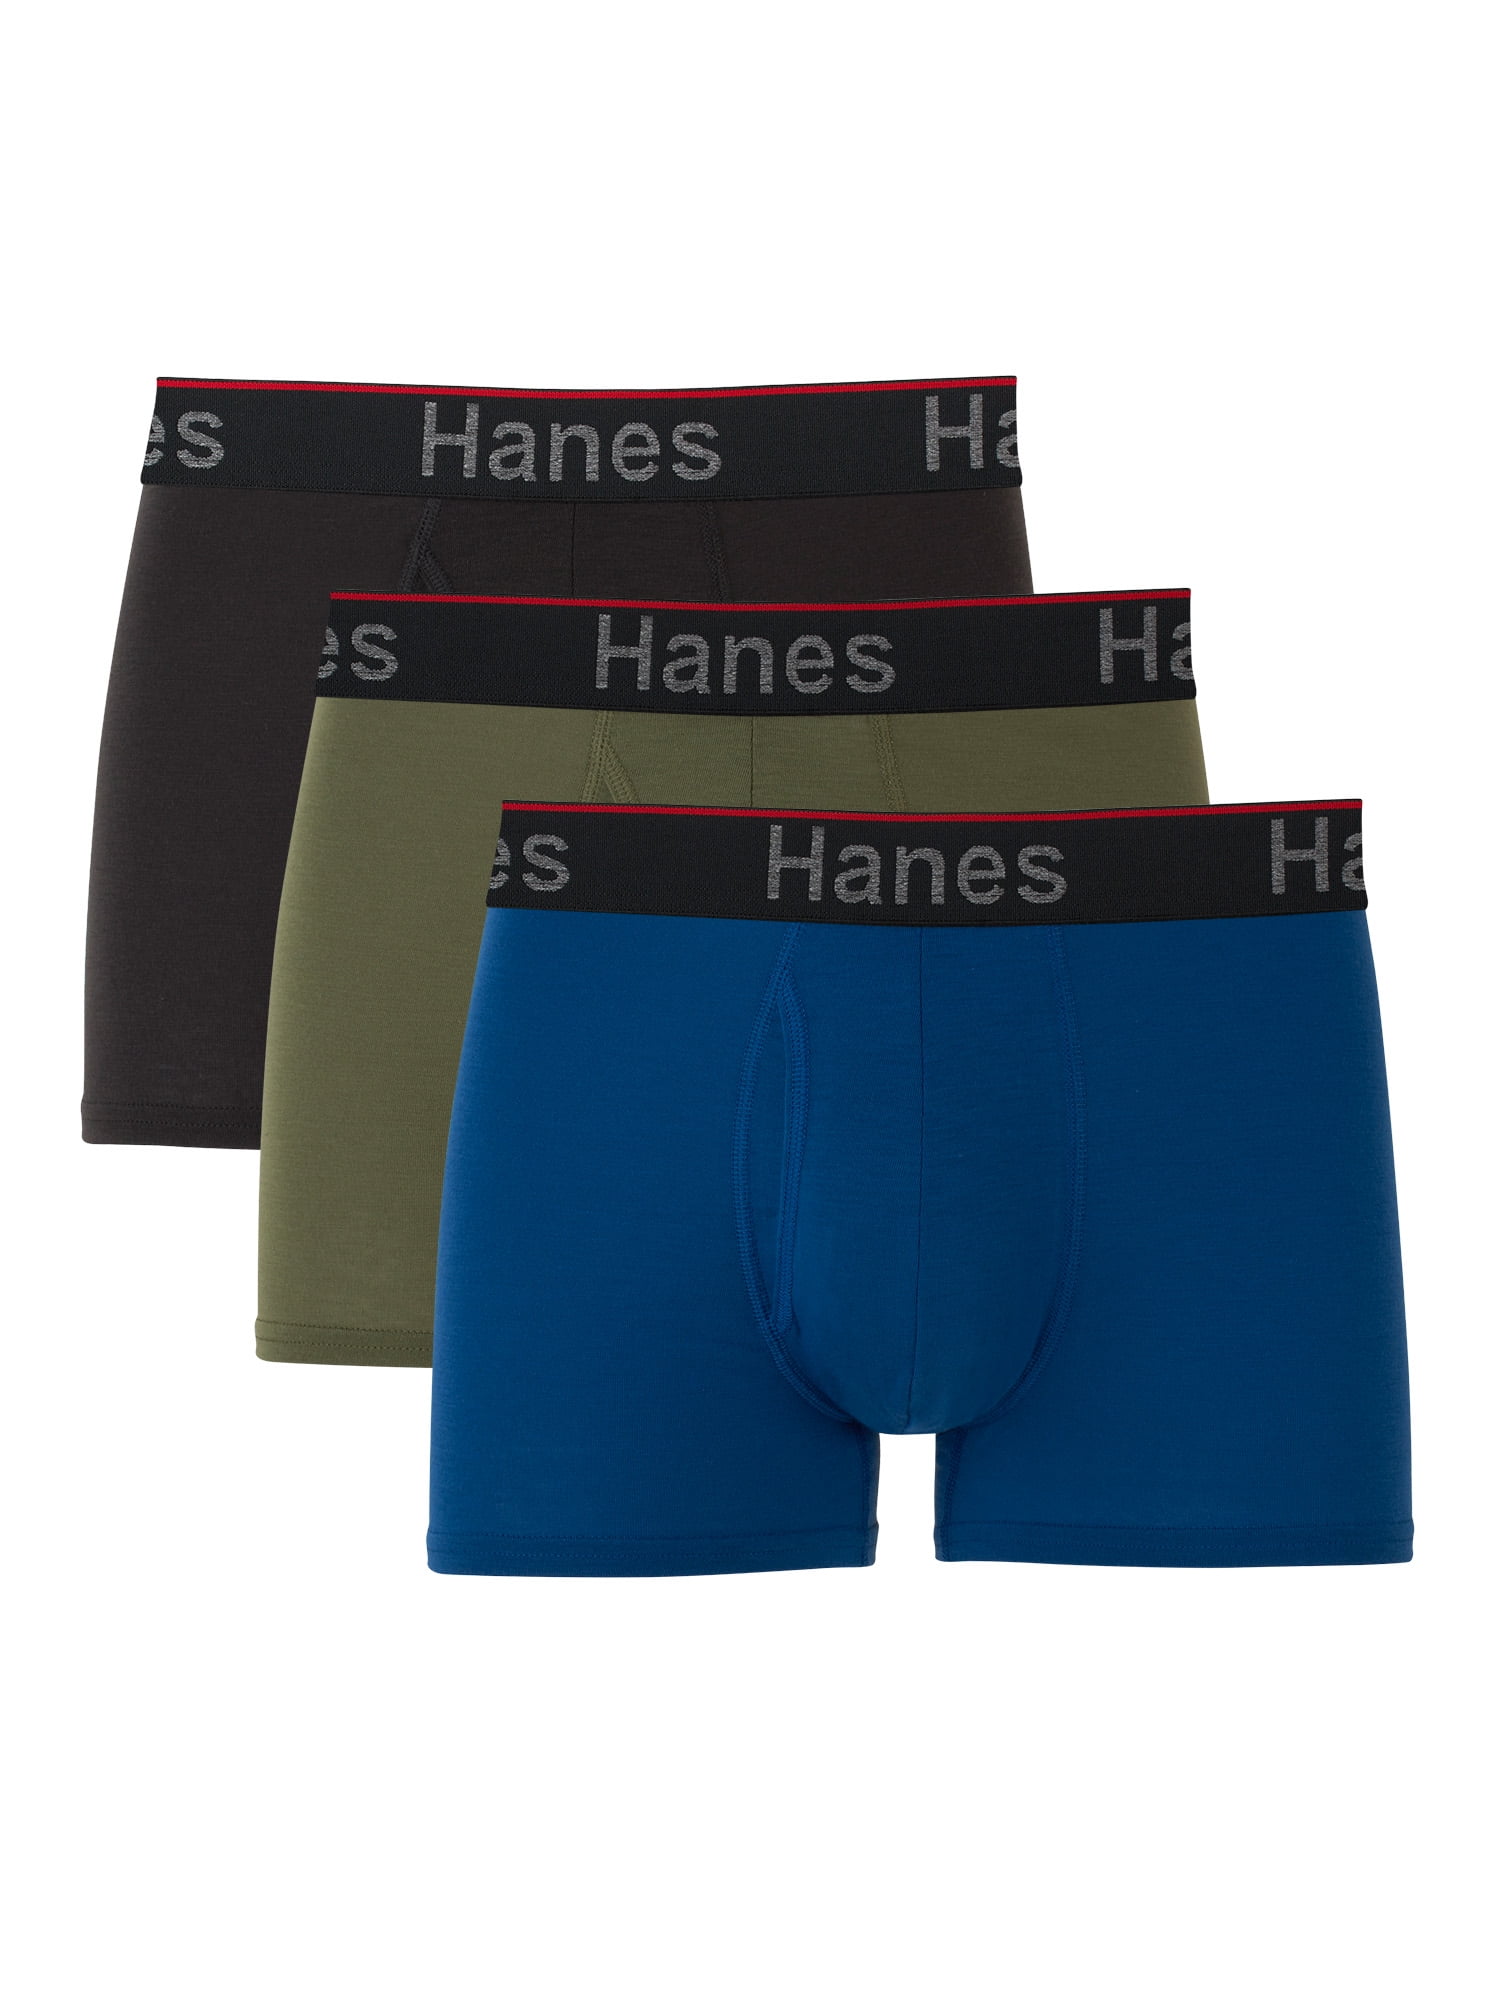 Hanes Total Support Pouch Men's Trunks Pack, Anti-Chafing Underwear ...